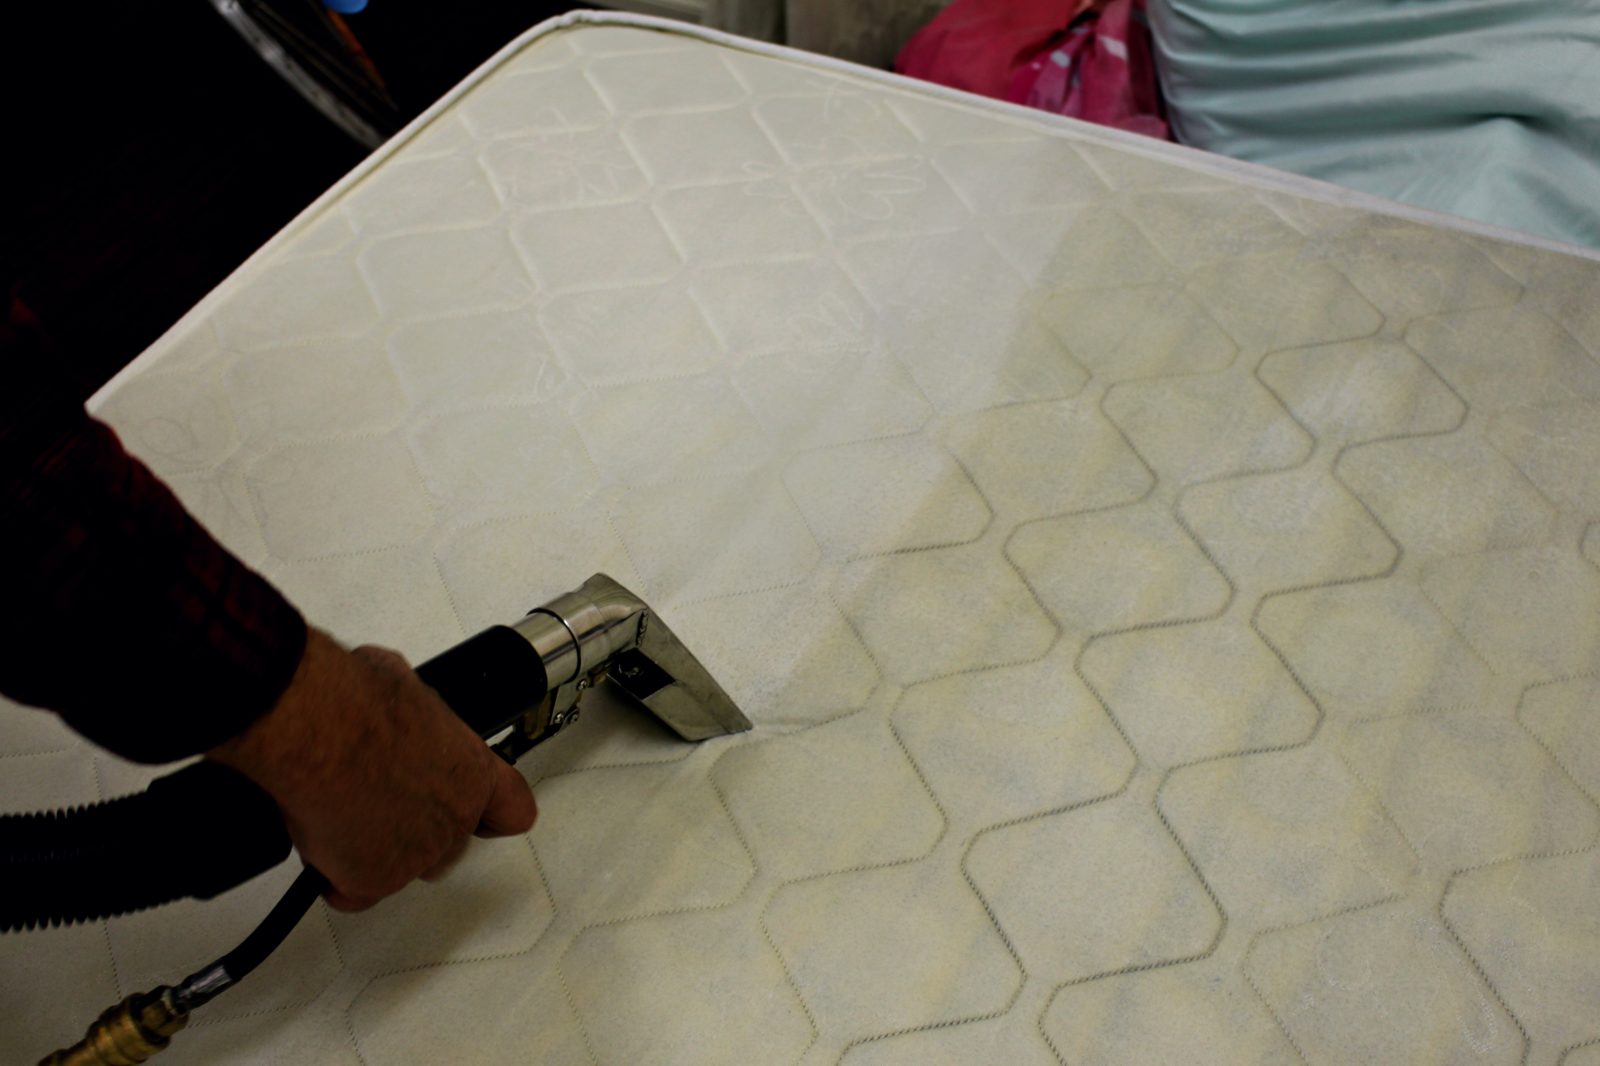 What Are The Elements Of A Business Mattress?